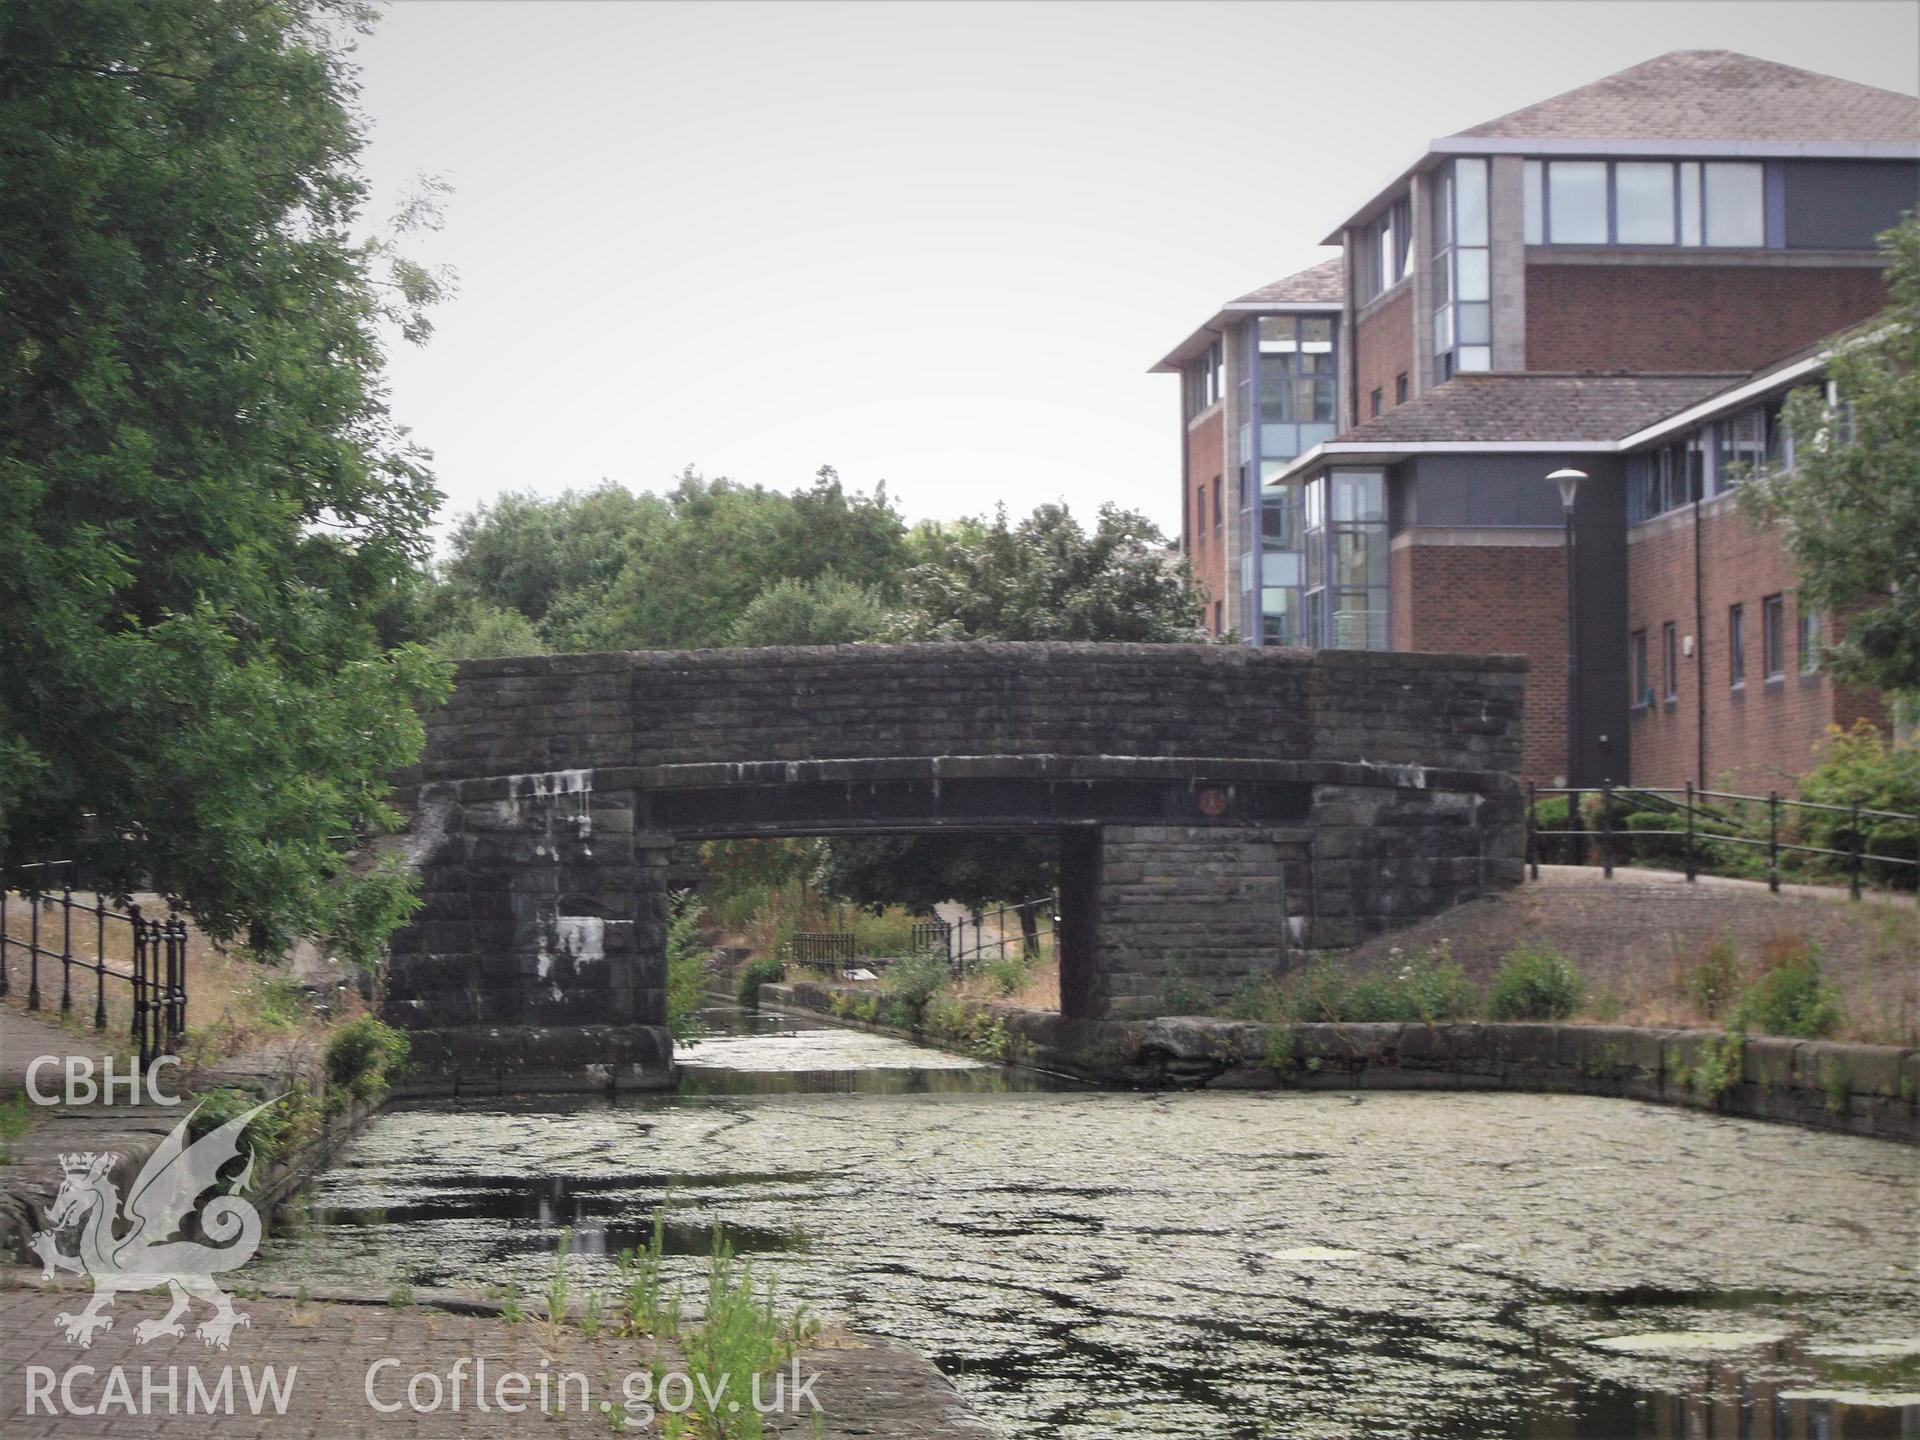 Colour photograph showing exterior of Road Bridge over Junction Canal, Butetown, Cardiff. Photographed during survey conducted by Adam N. Coward on 17th July 2018.